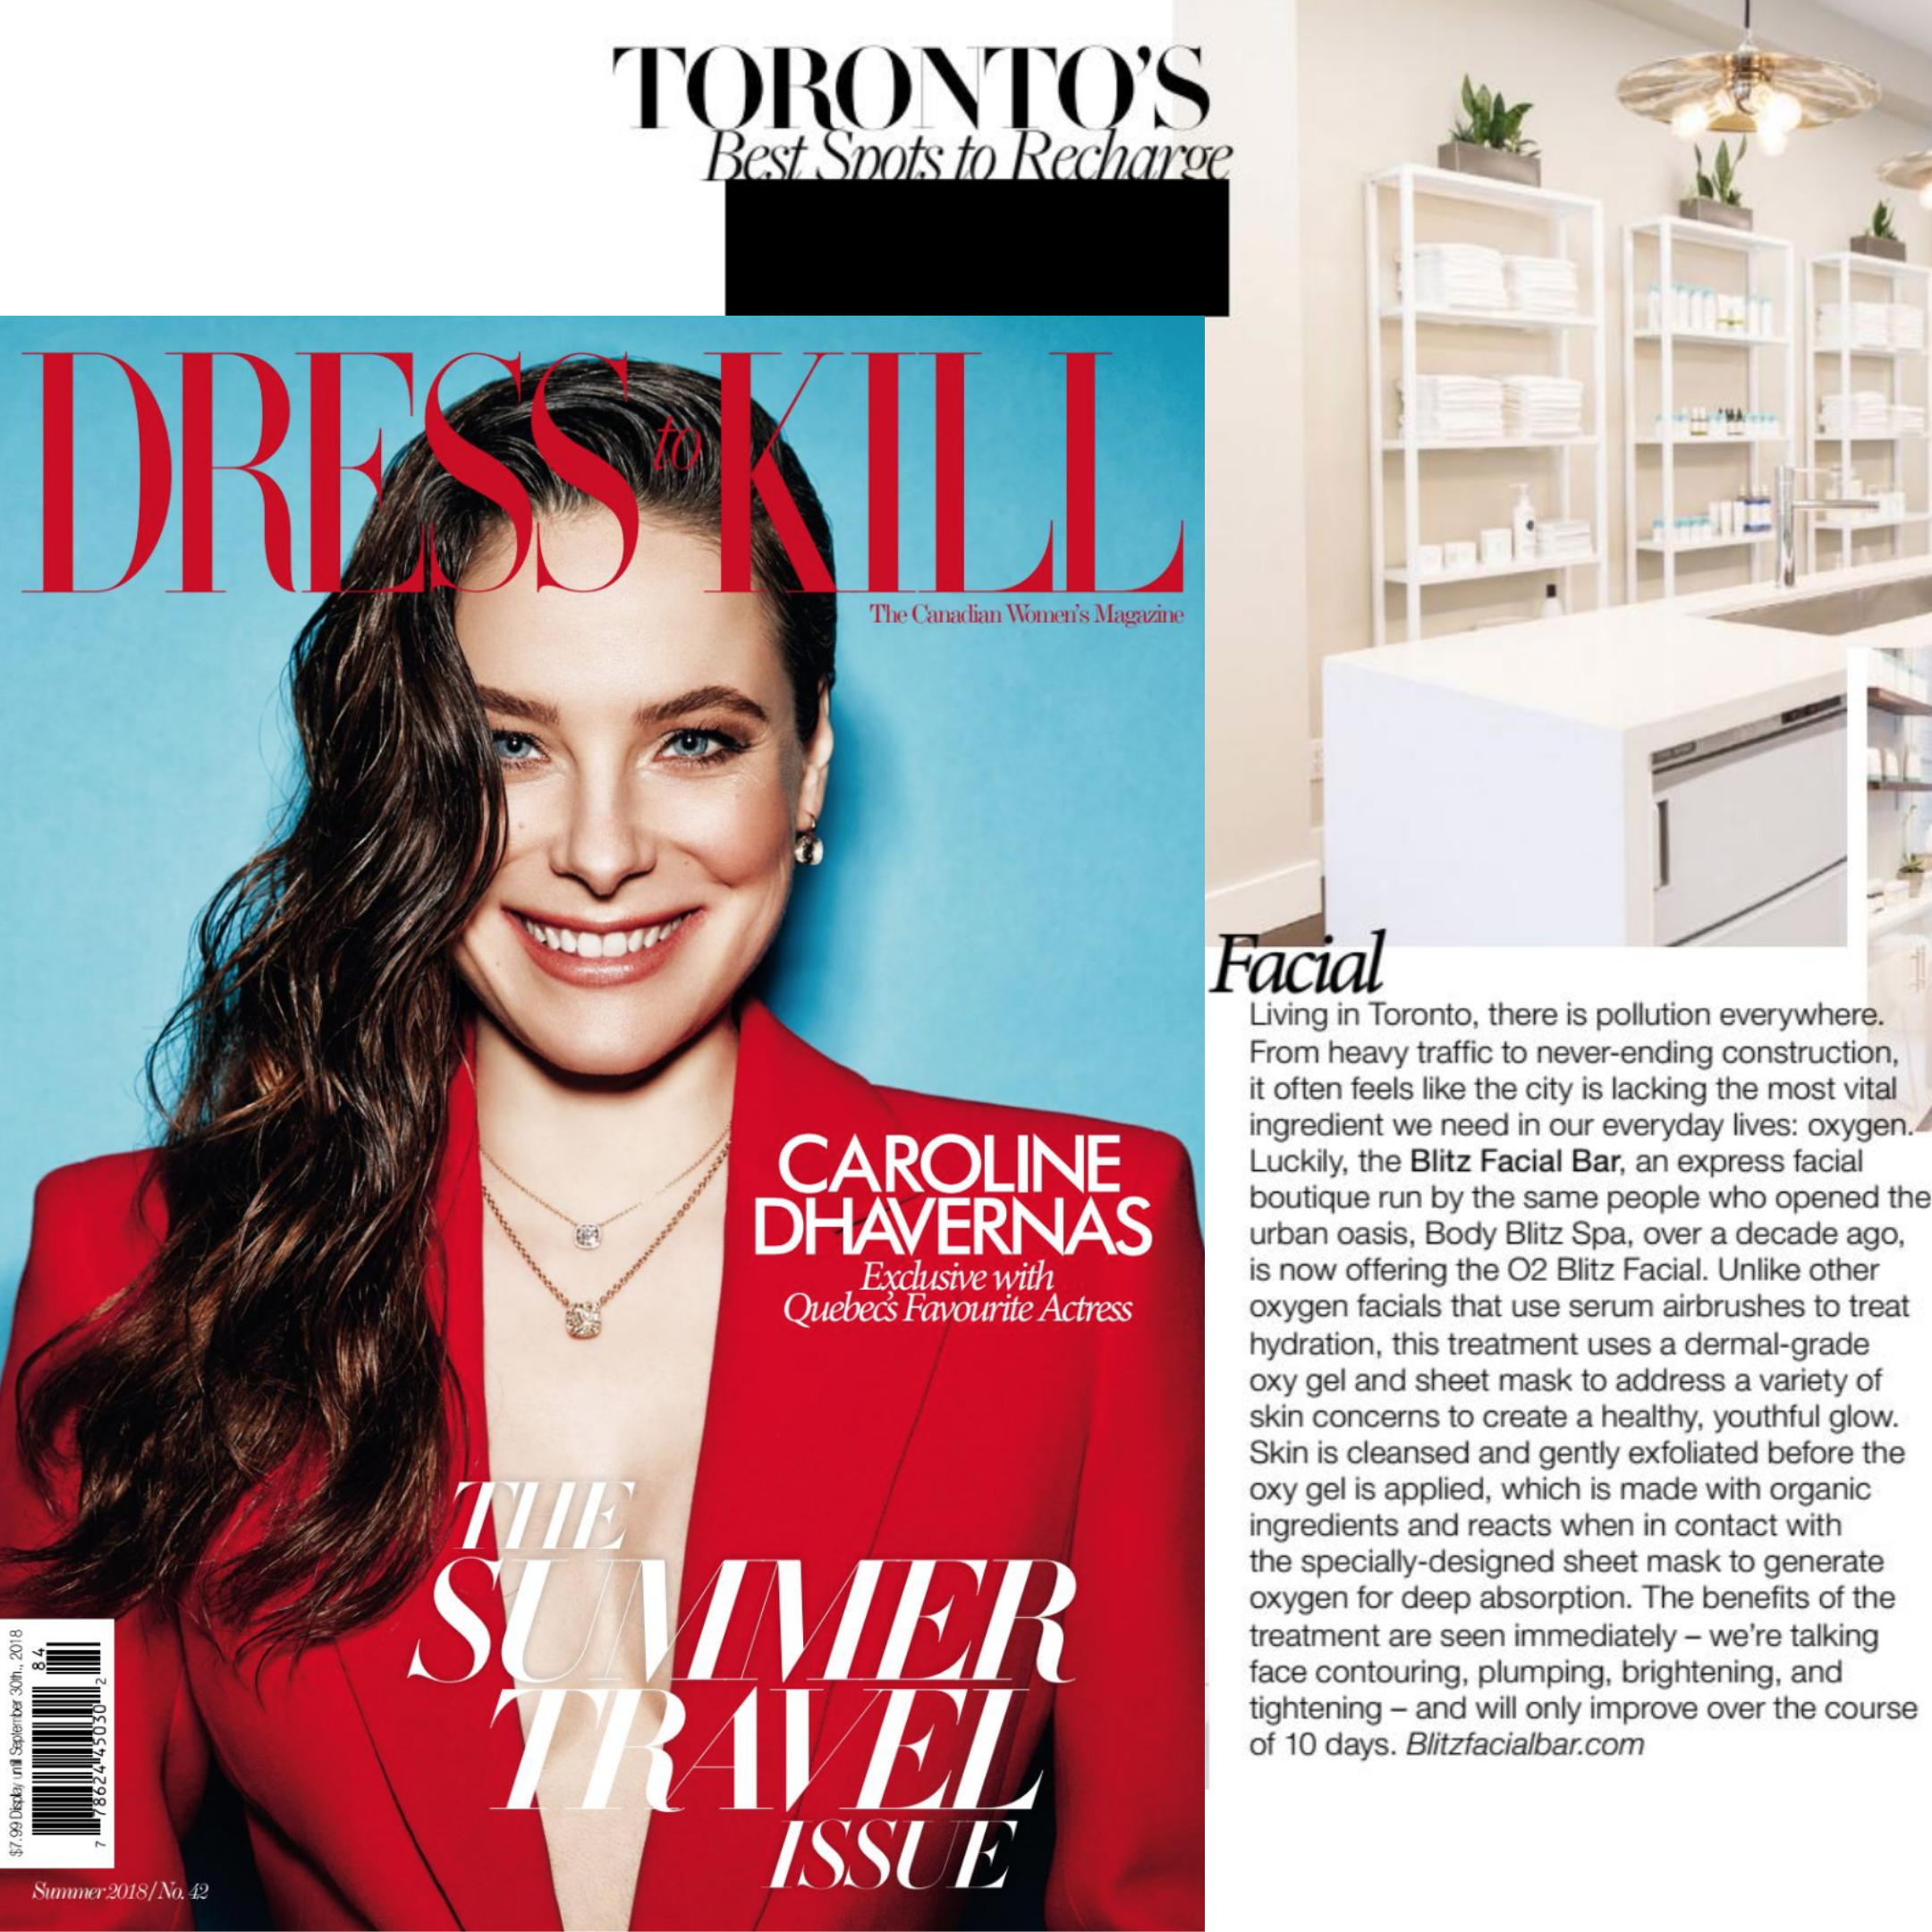 Dress to Kill mentions Blitz Facial Bar in their roundup of Toronto’s Best Spots to Recharge in their Summer 2018 magazine issue.